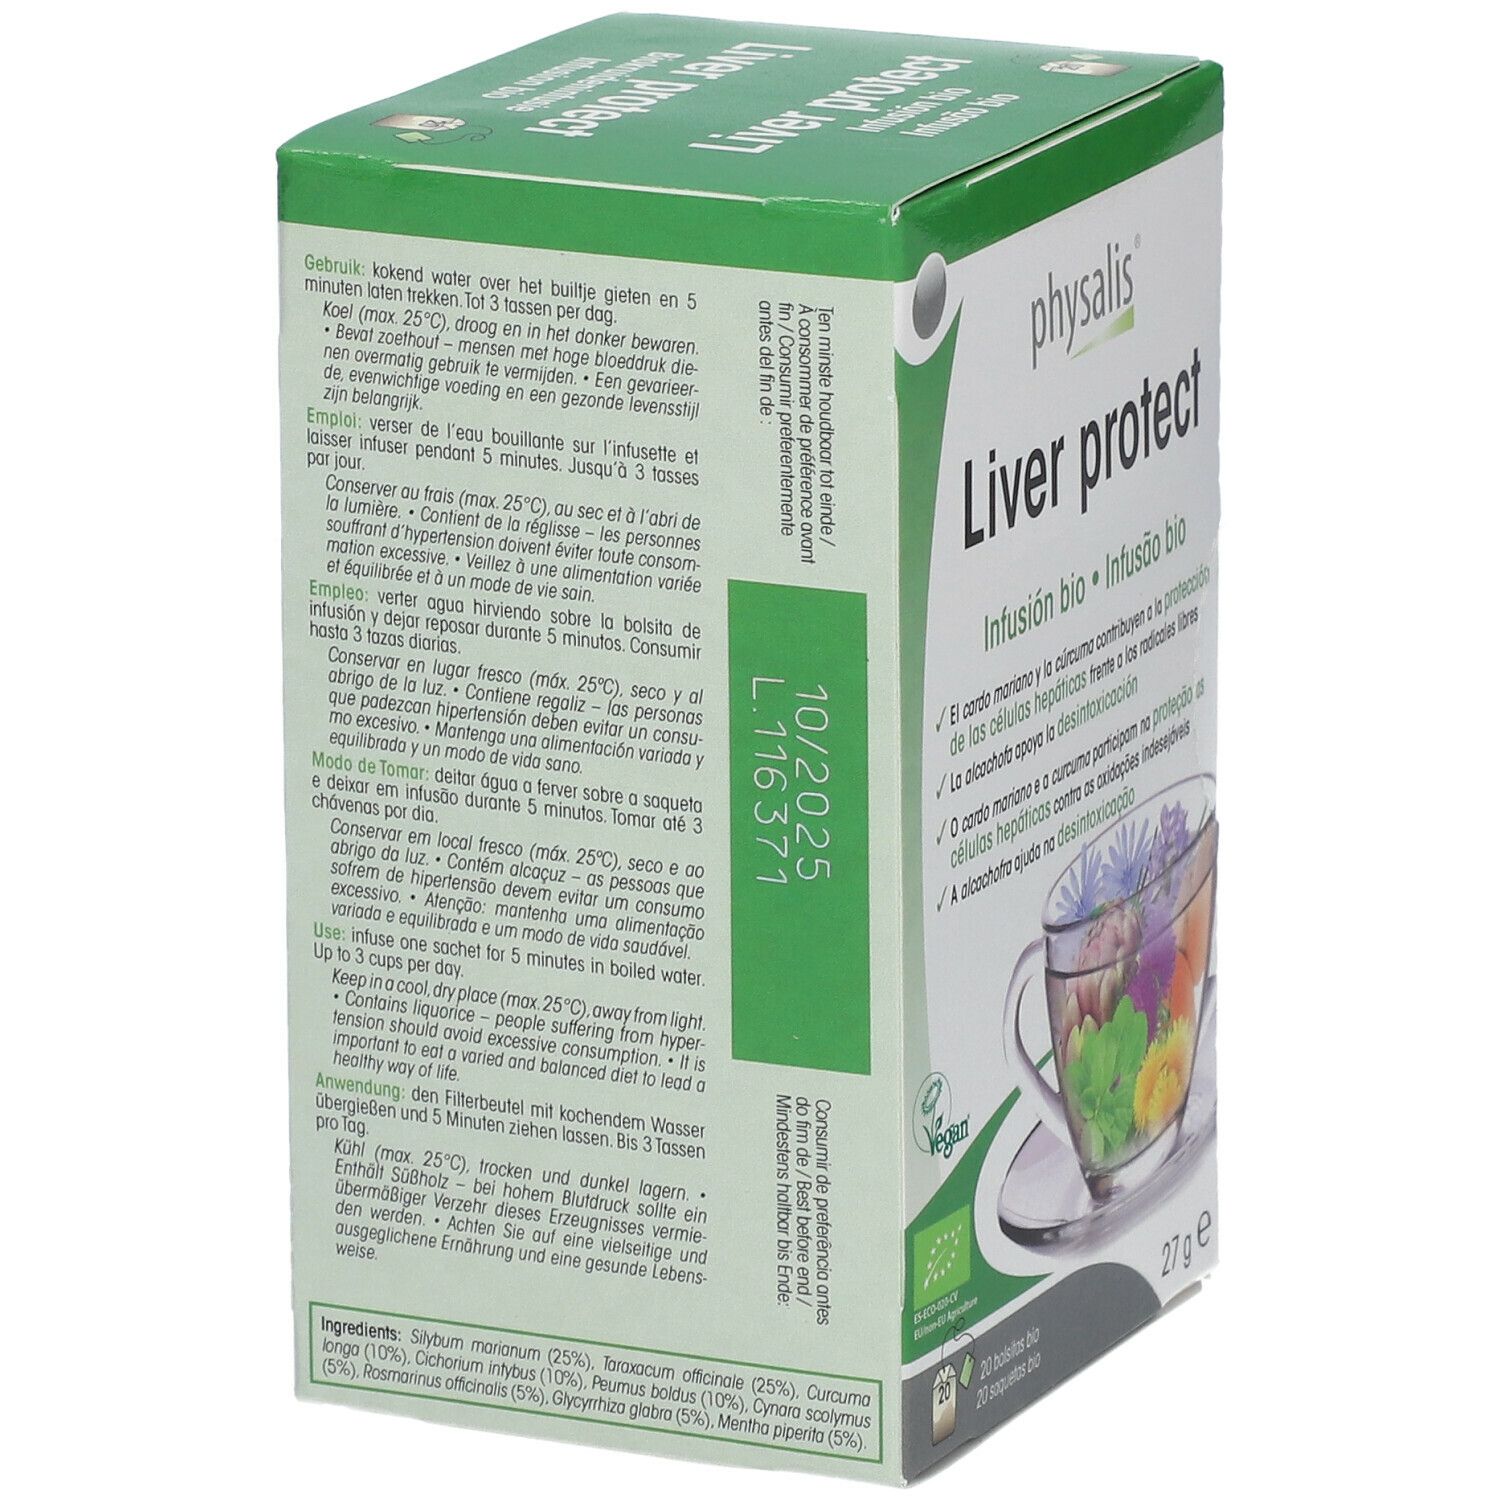 Physalis Liver protect